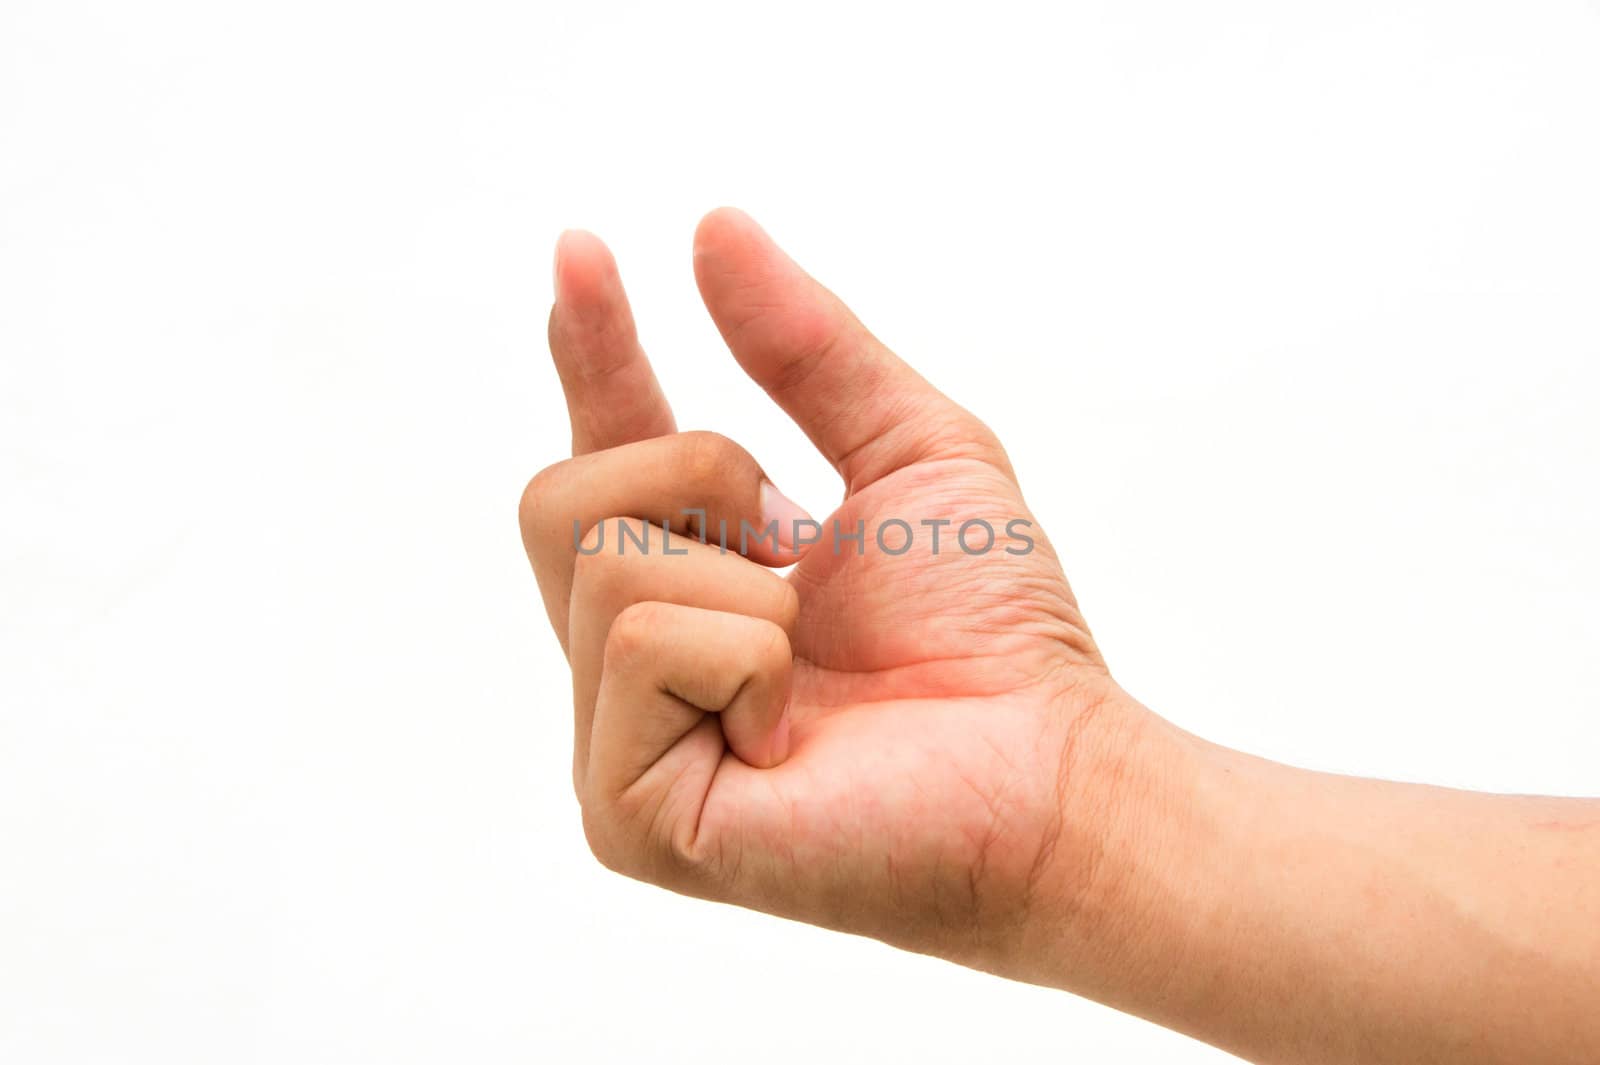 well shaped male hand and arm reaching for something.isolated on white